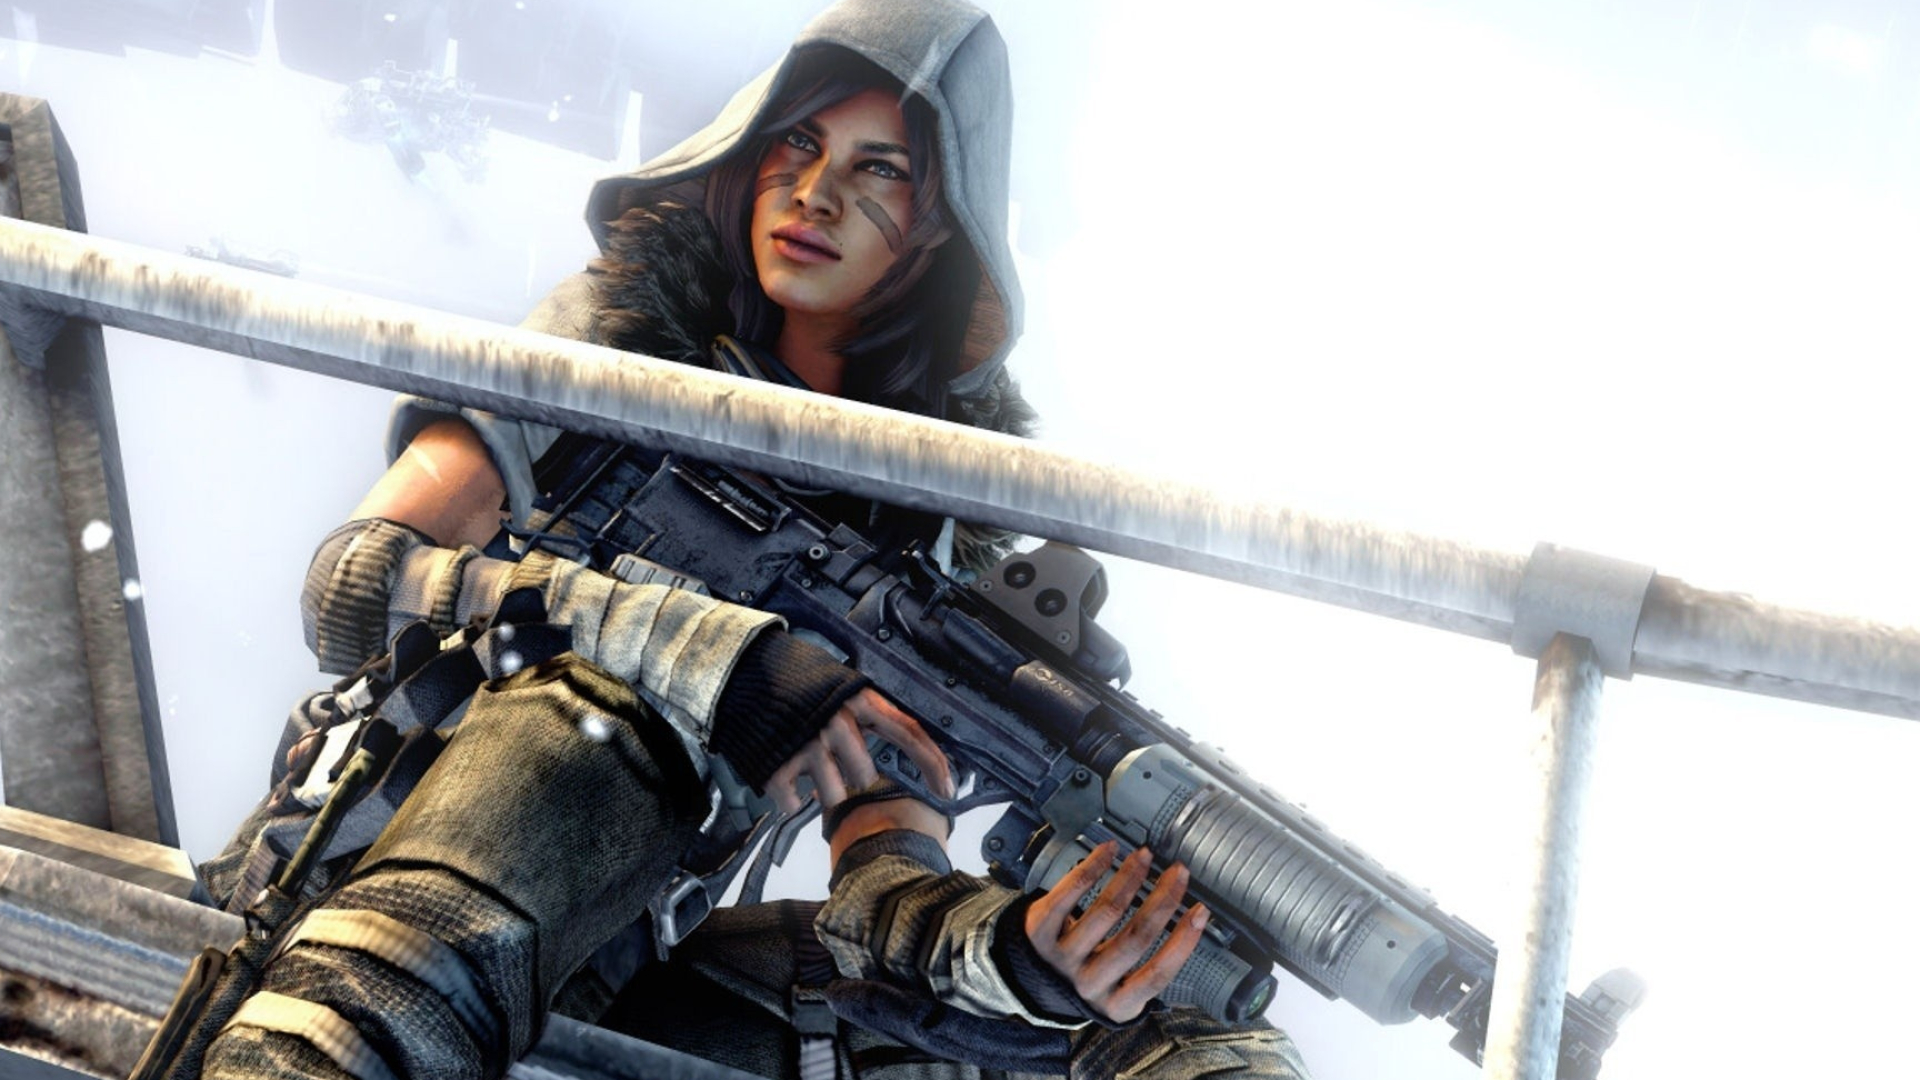 Killzone 3, Young woman wallpaper, Video game artwork, Action-packed gaming, 1920x1080 Full HD Desktop